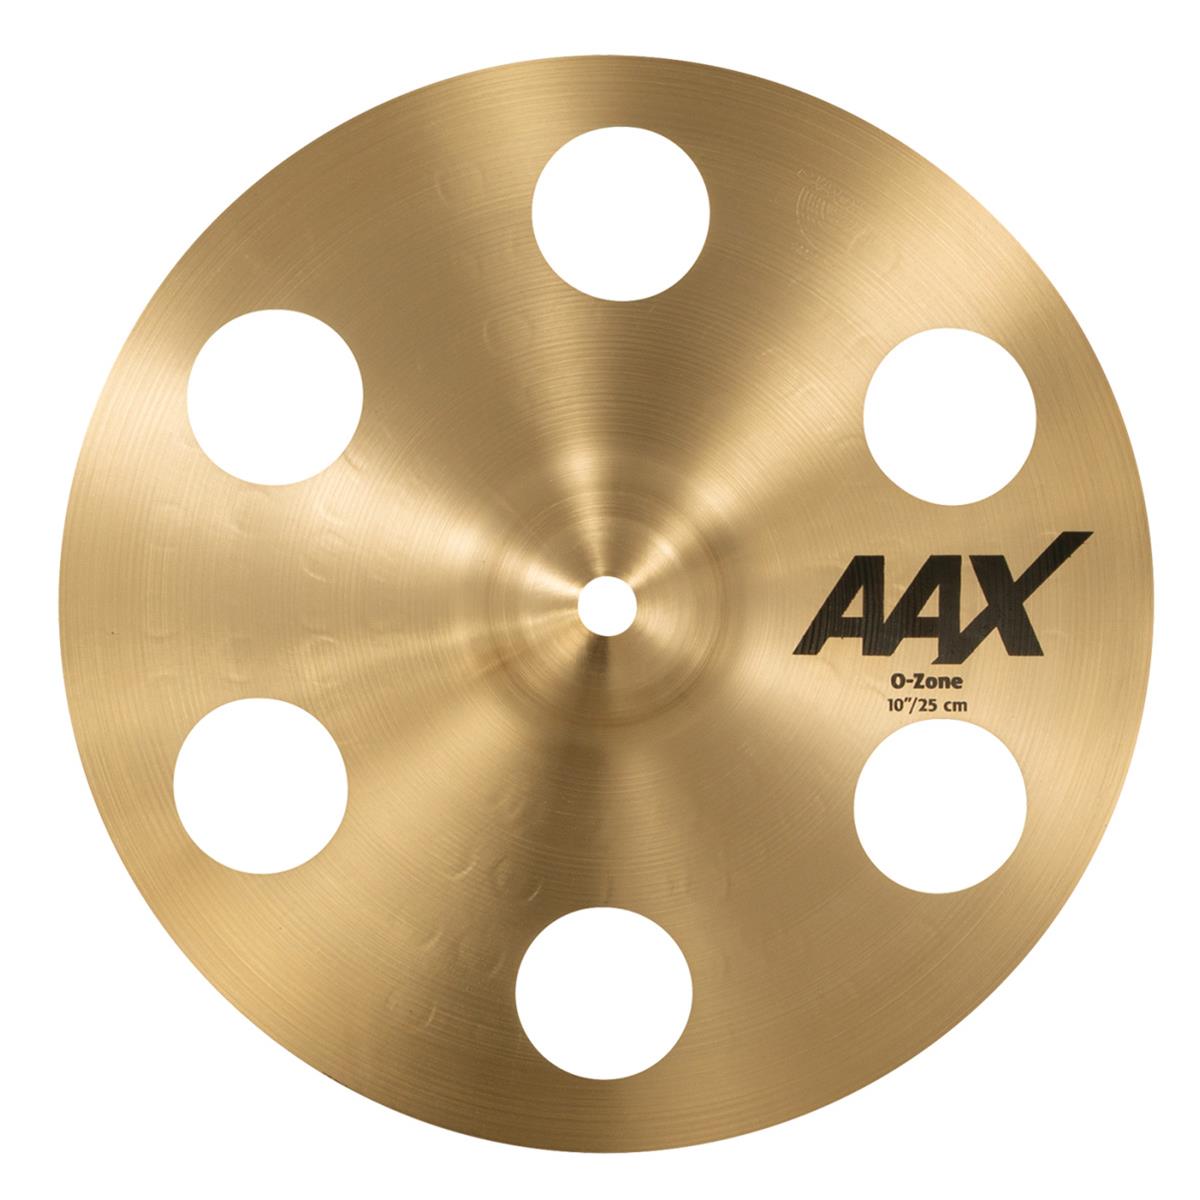 Sabian 10" AAX O-Zone Splash Cymbal, Natural Finish Multi-hole design of the SABIAN 10" AAX O-Zone Splash delivers bright, airy sounds with a degree of agitation. The SABIAN AAX series delivers consistently bright, crisp, clear and cutting responses - AAX is the ultimate Modern Bright sound!